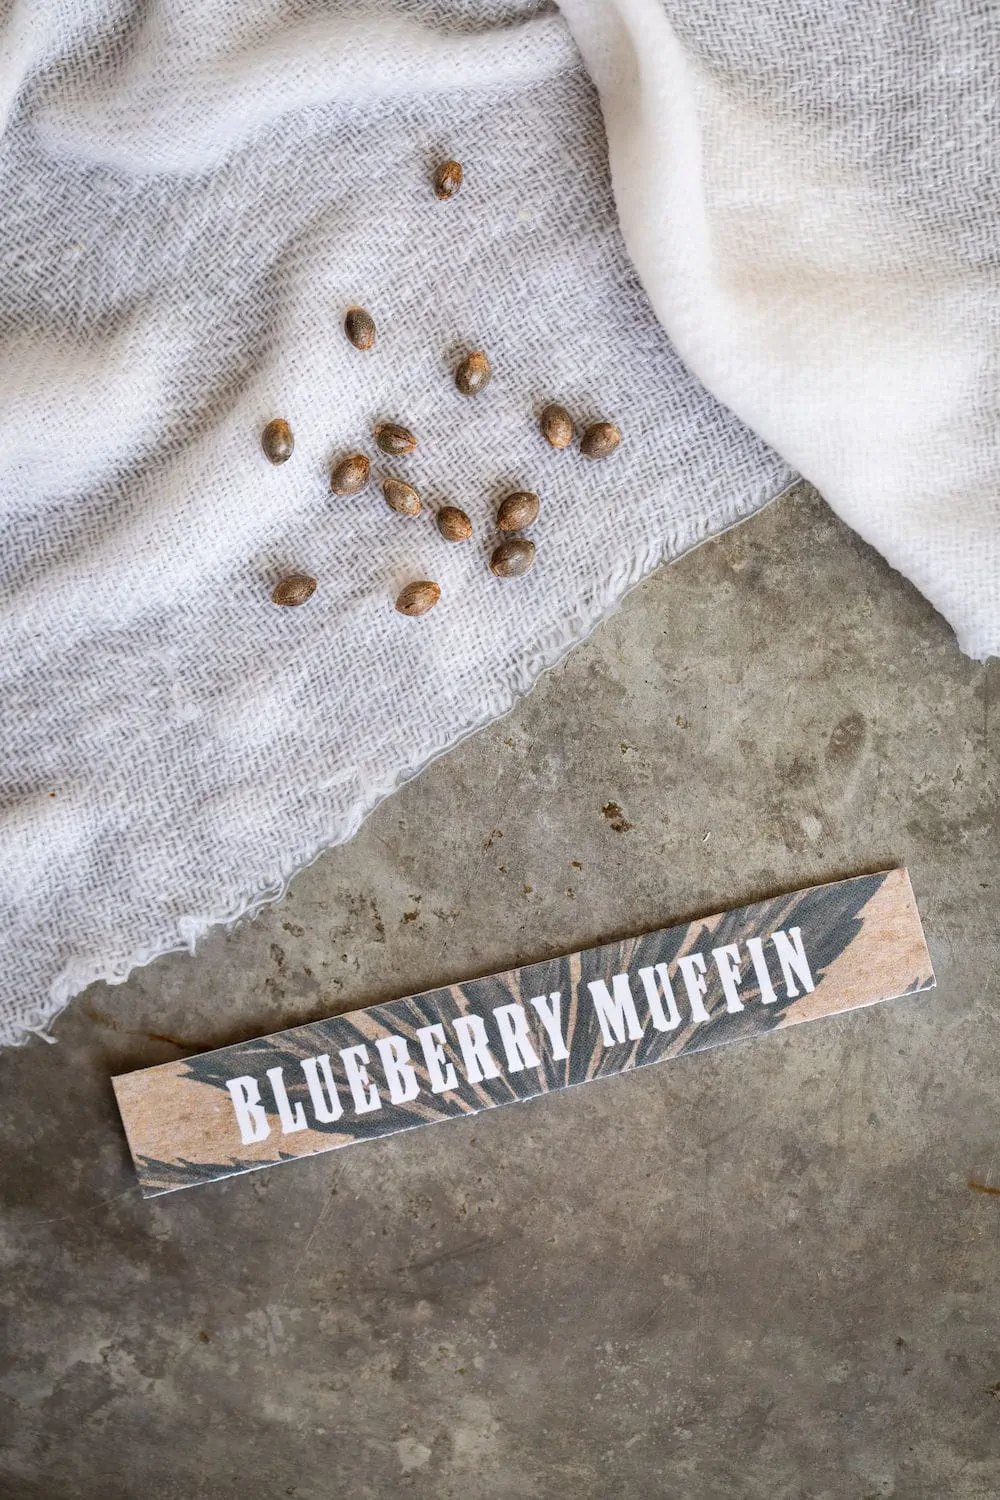 blueberry muffin strain logo with cannabis seeds on white towel